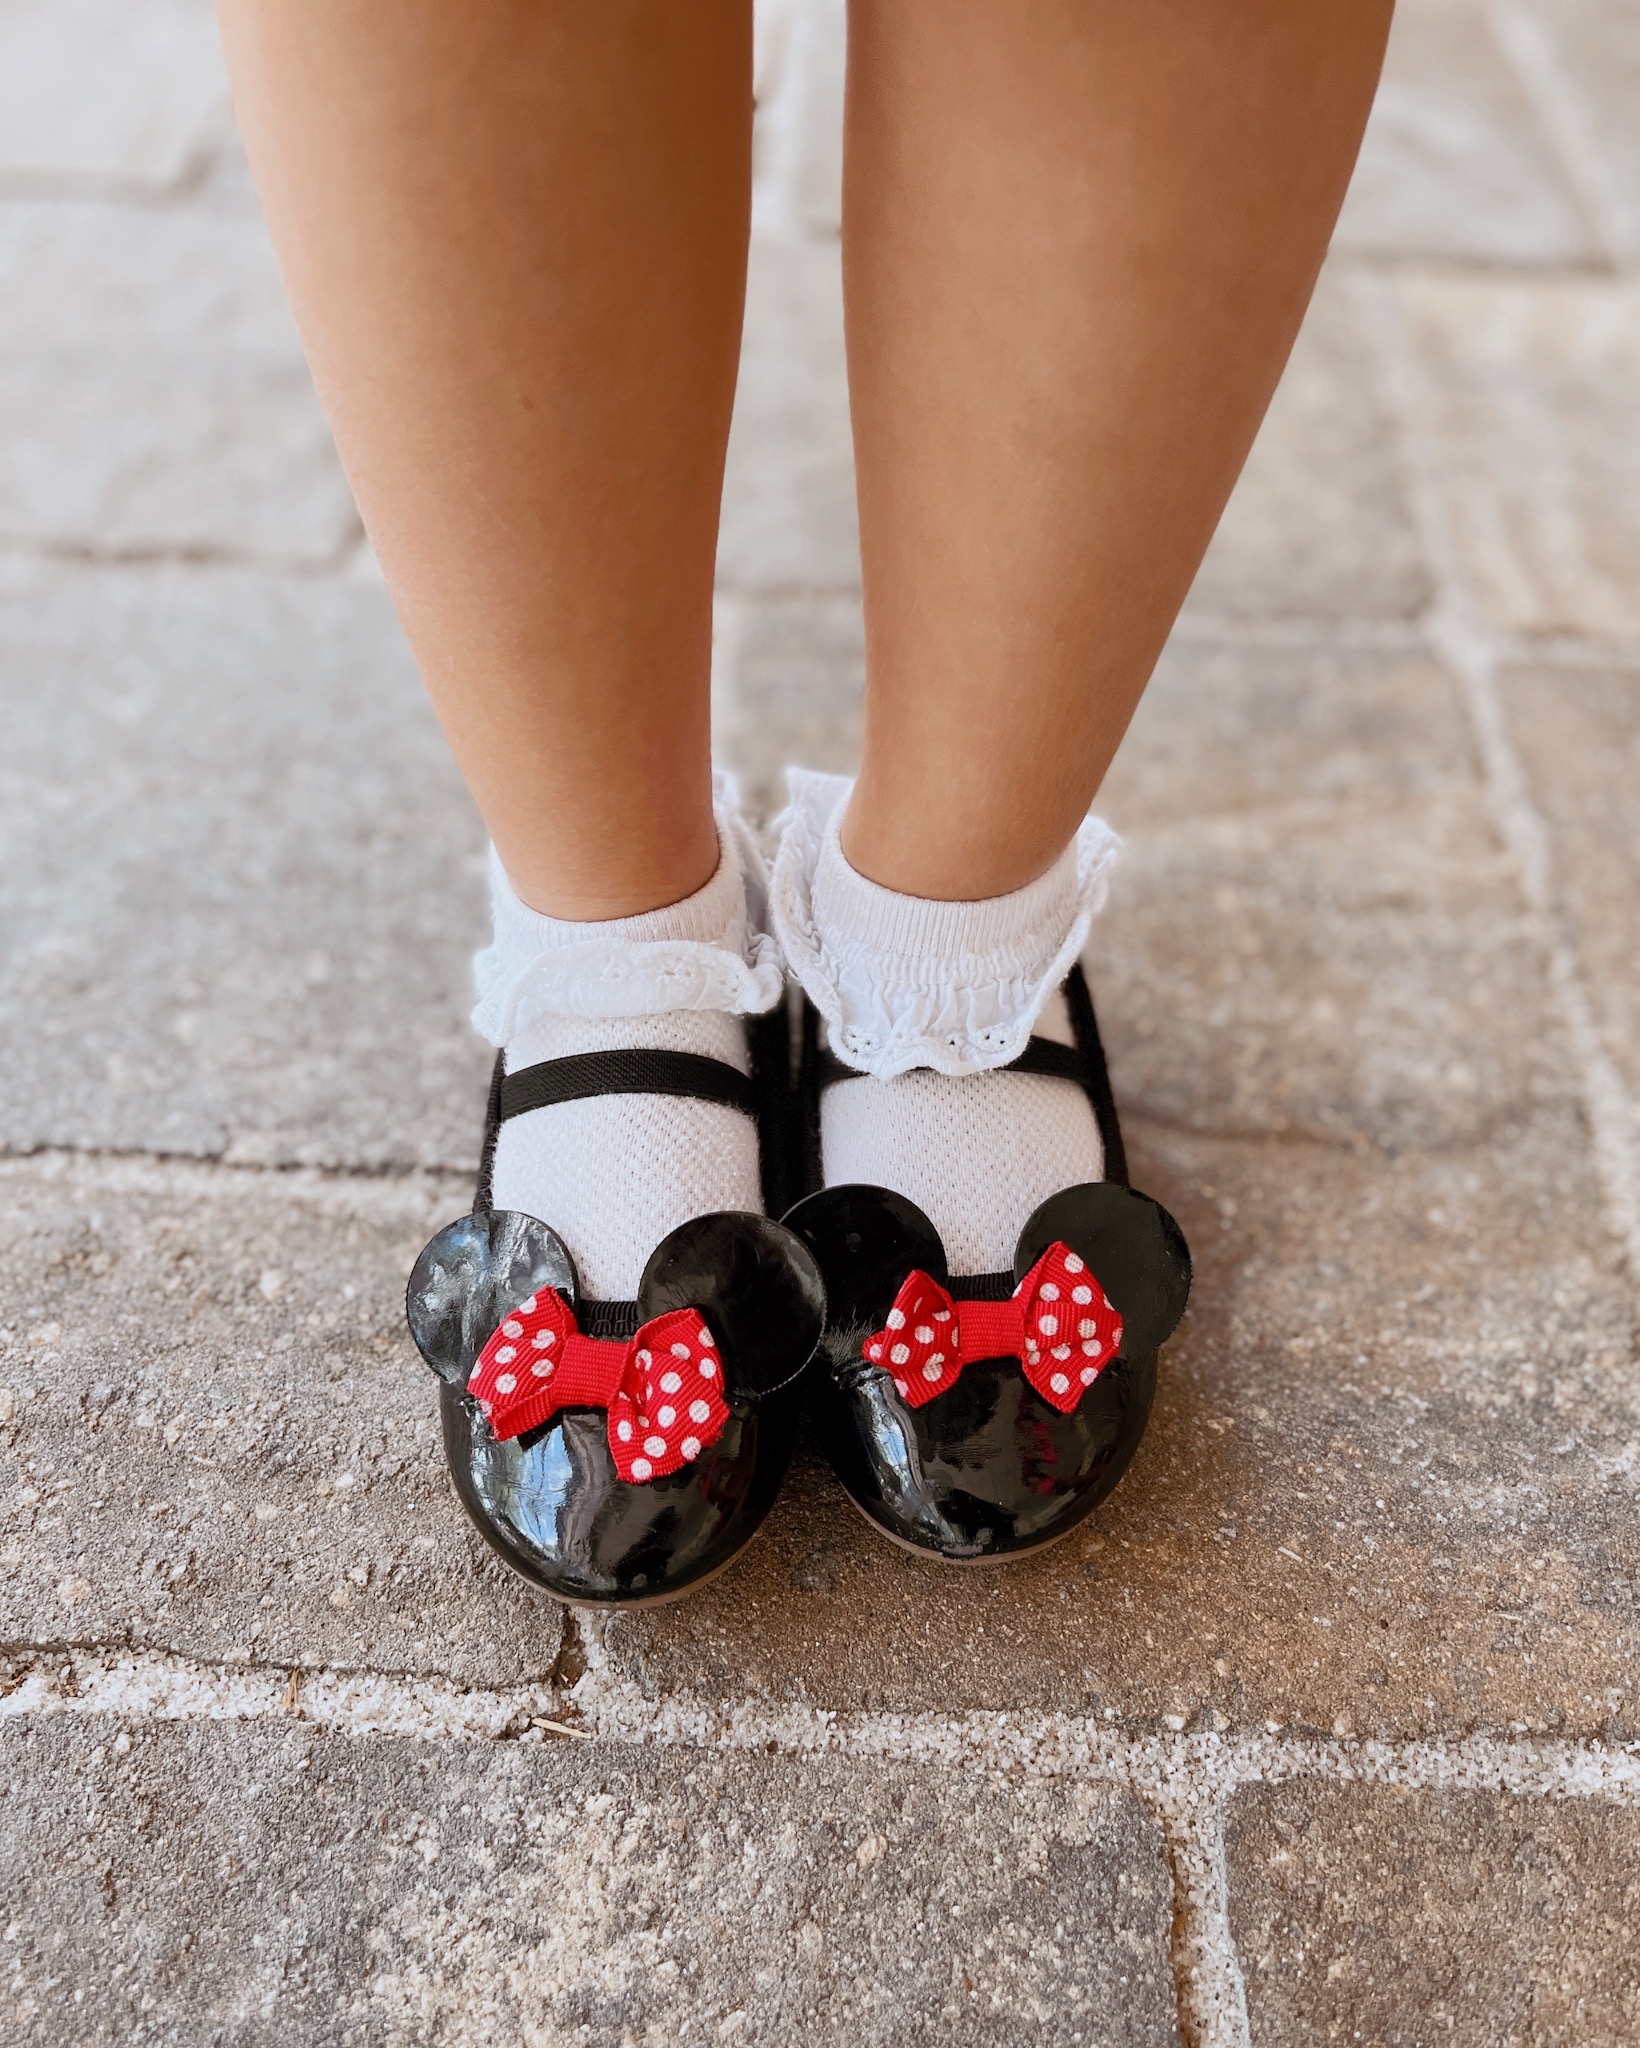 Thrifted Minnie Mouse shoes for Pepper's Magical "Mickey & Minnie Mouse" 3rd Birthday Pool Party | Creative ideas for hosting a magical Mickey & Minnie themed birthday bash for your little Mouseketeer with do-able decor, punny snacks, and party games that are fun for all ages! via thinkingcloset.com